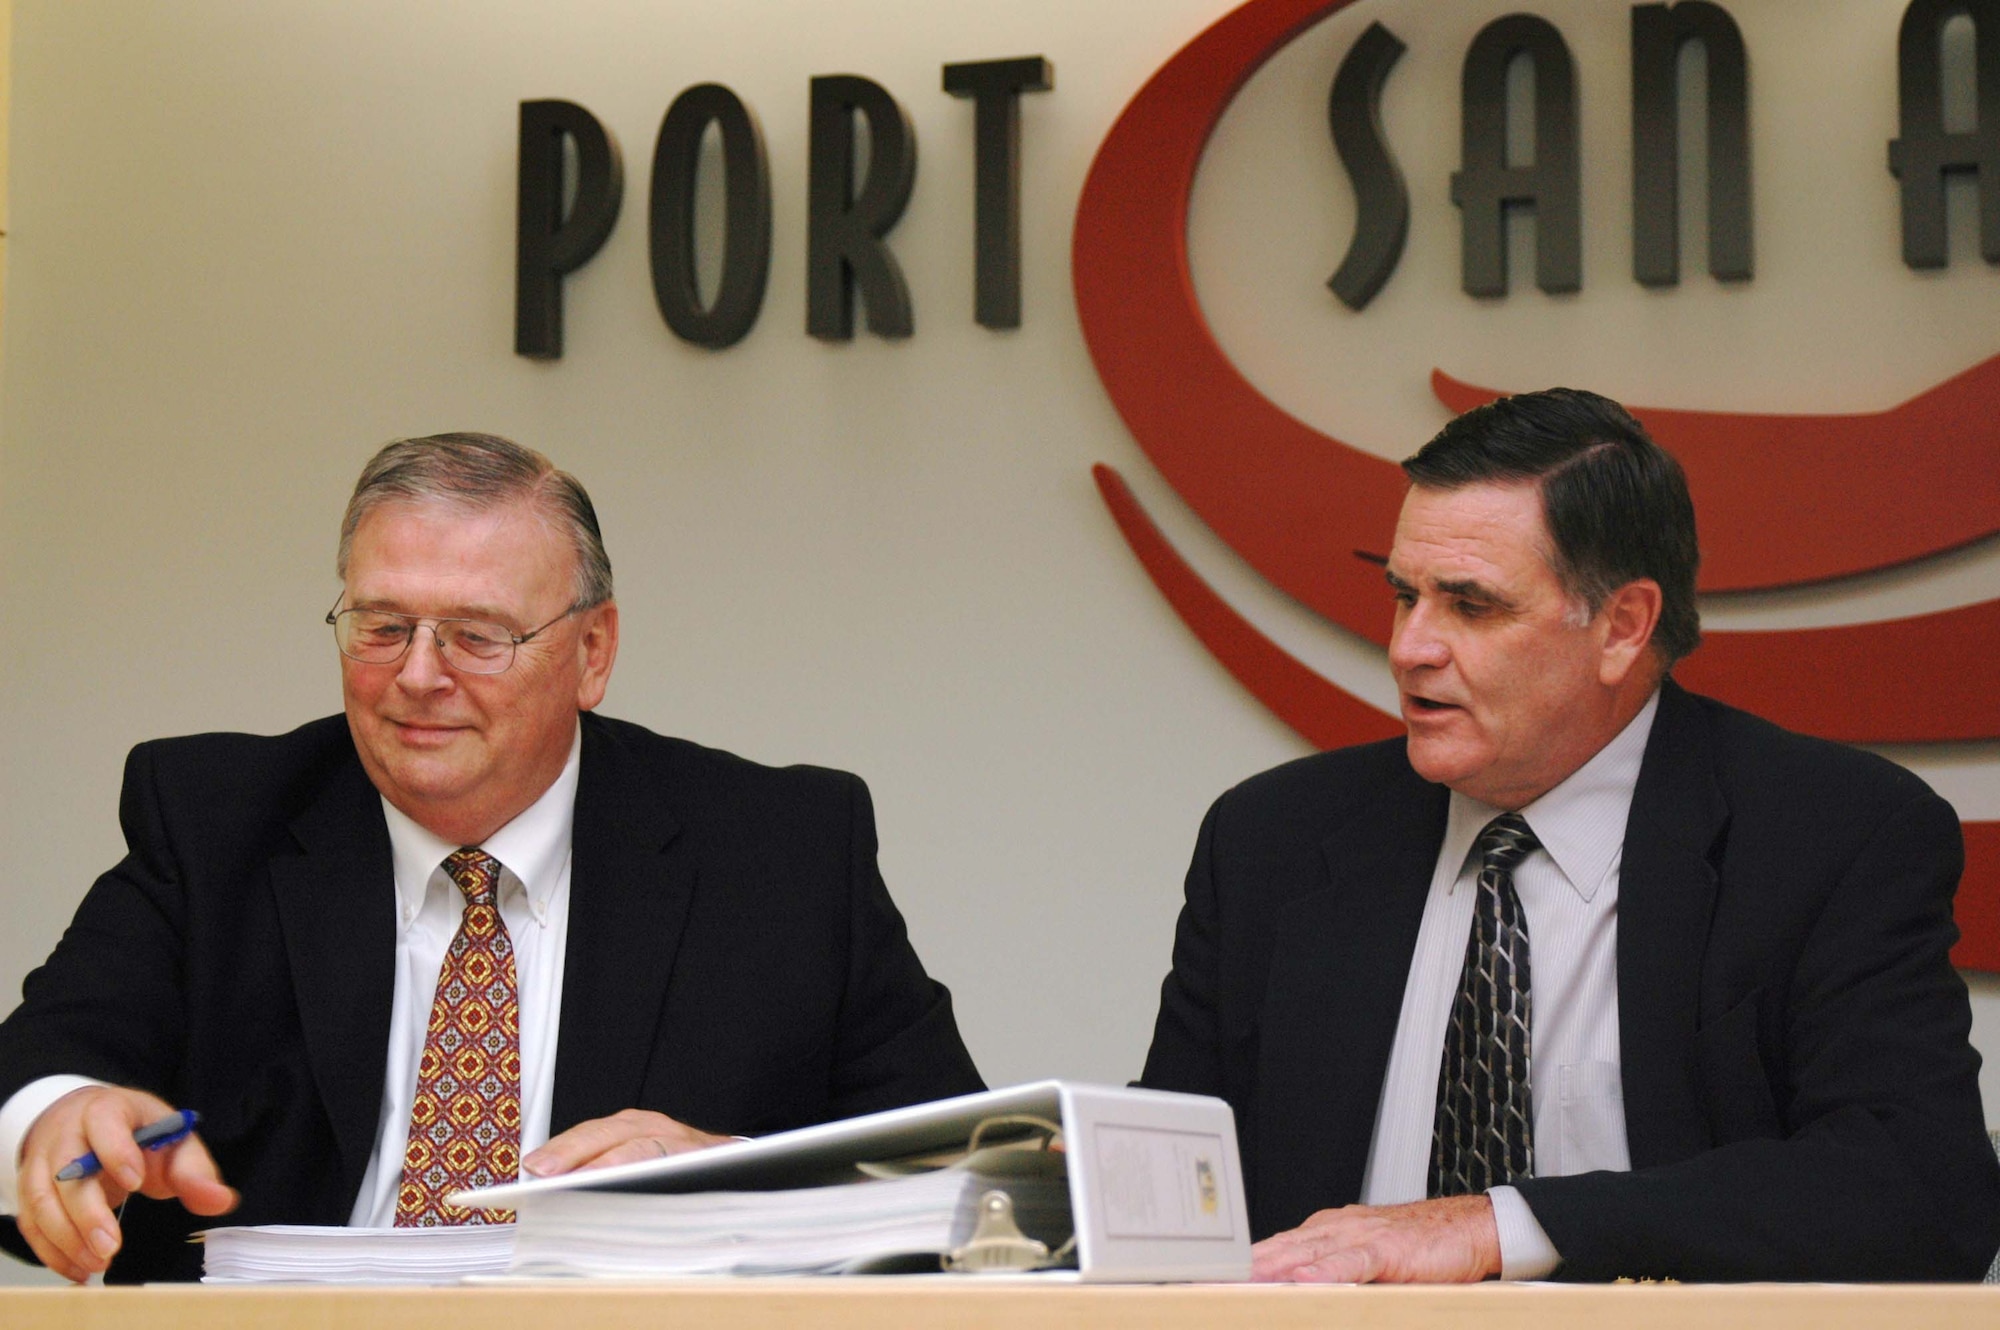 Mr. Bob Moore, AFRPA Director, and Mr. Bruce Miller, President and CEO of Port San Antonio, sign the deed to transfer the remaining 389 acres of the former Kelly Air Force Base to the Port of San Antonio.
